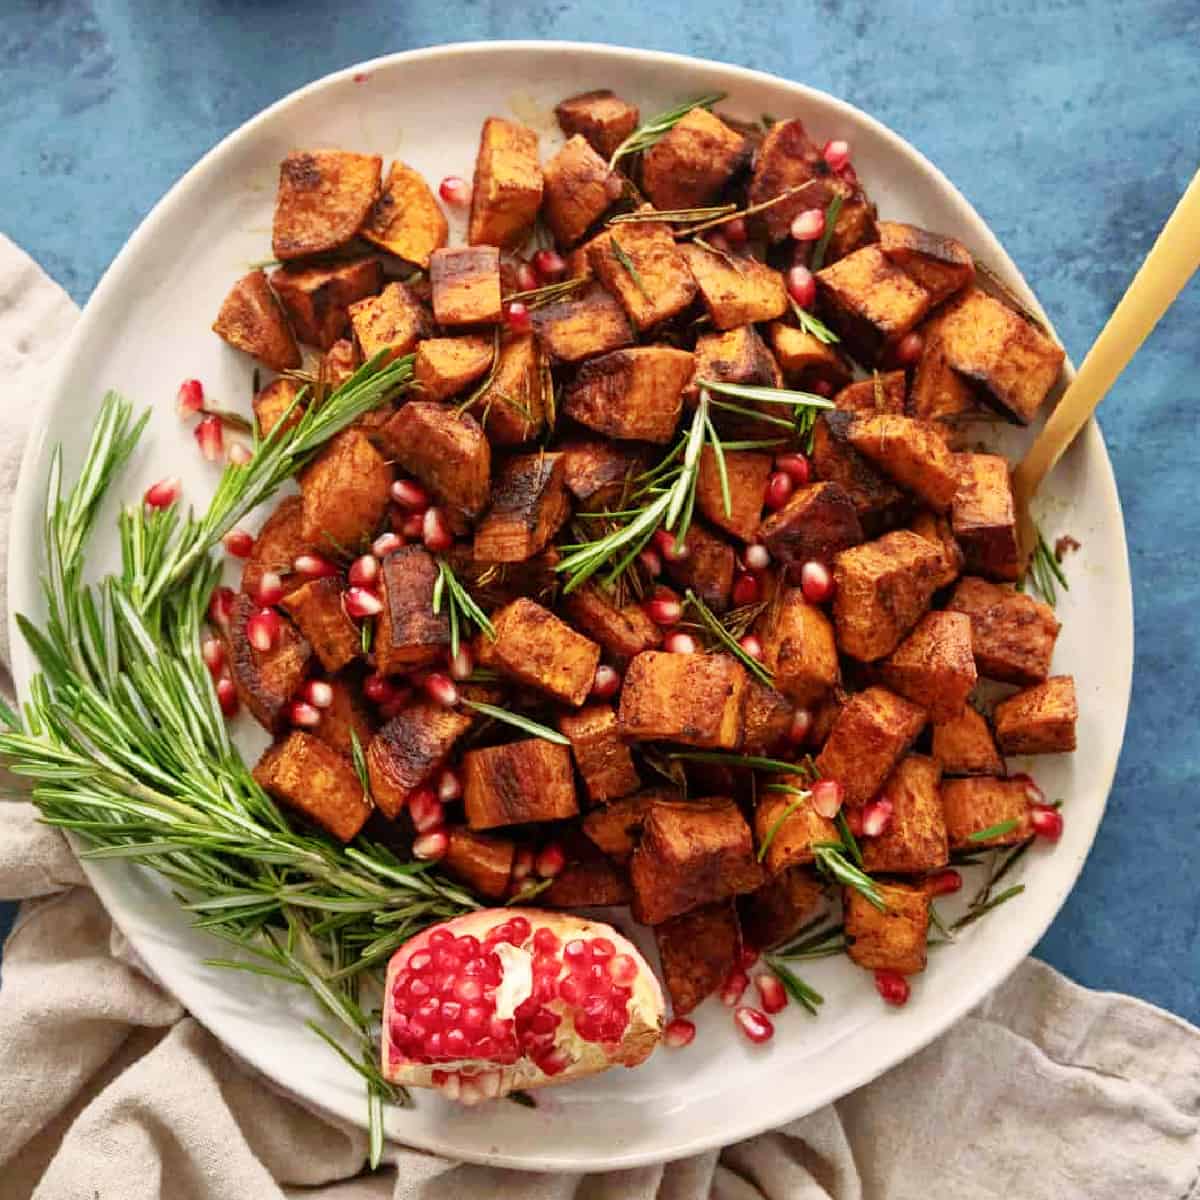 Roasted sweet potatoes are the perfect side dish. They're made with spices and olive oil, then roasted to perfection until caramelized.
